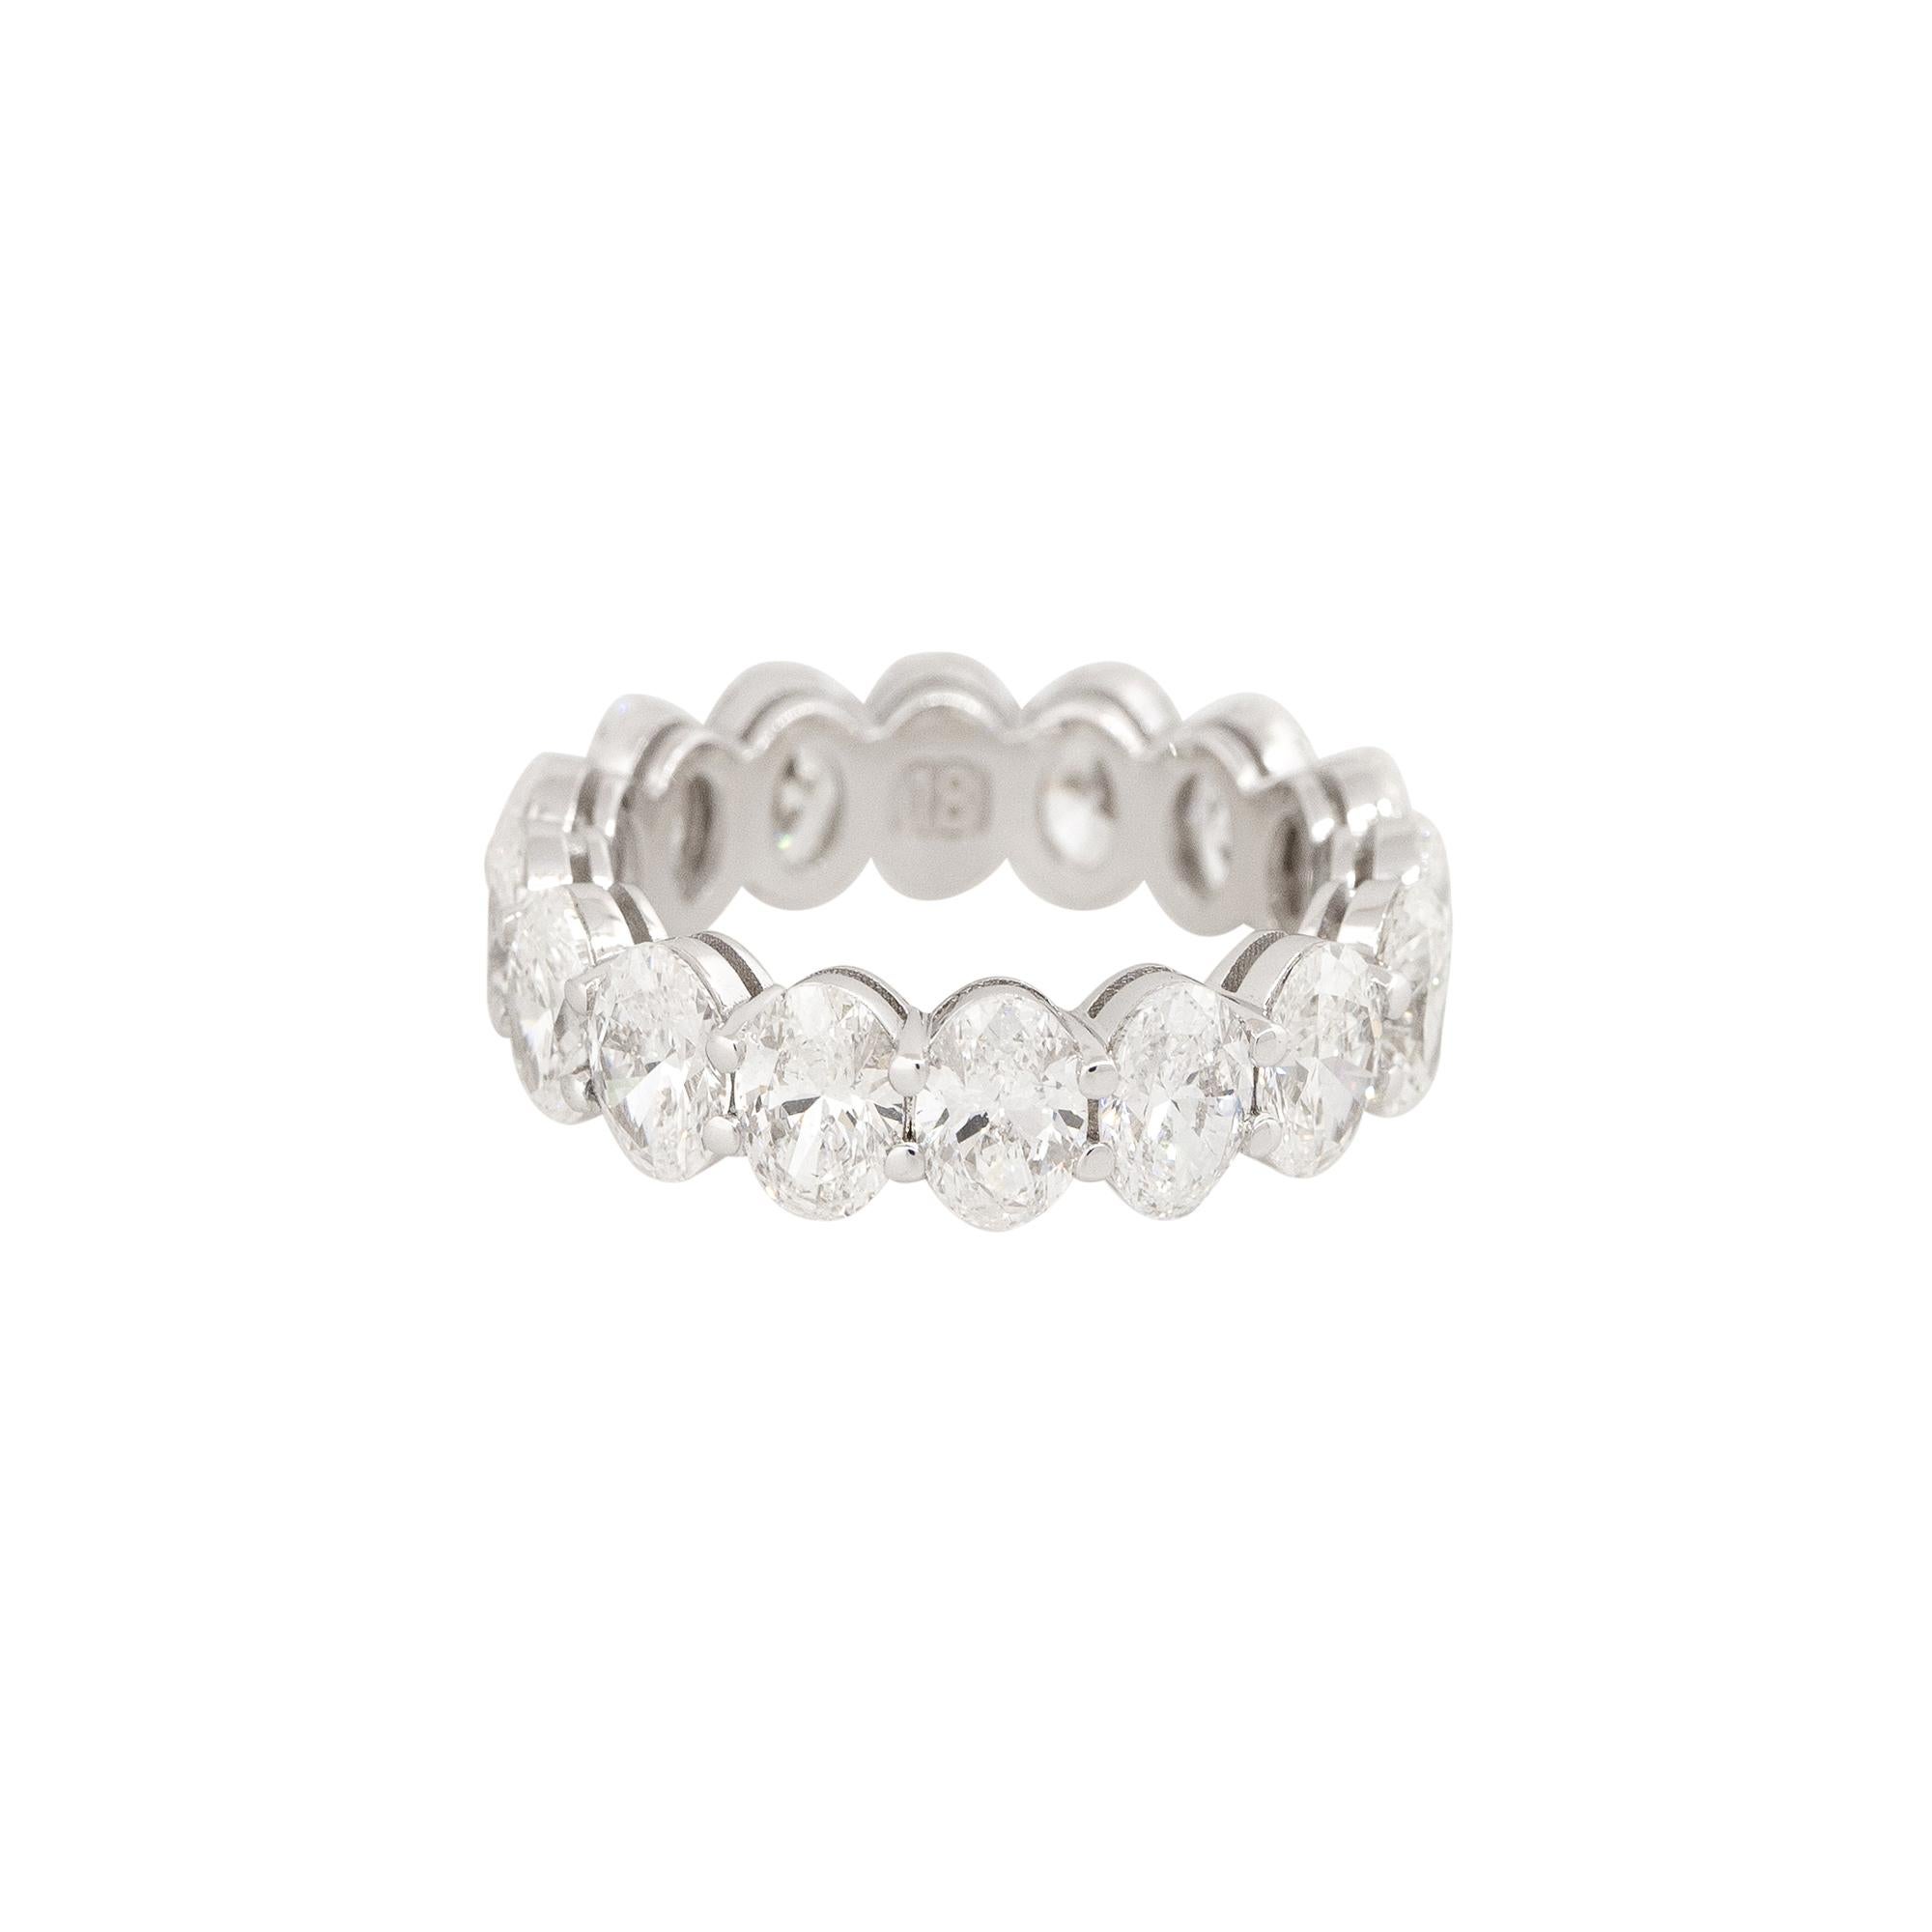 6.26 Carat Oval Cut Diamond Eternity Band 18 Karat In Stock In Excellent Condition For Sale In Boca Raton, FL